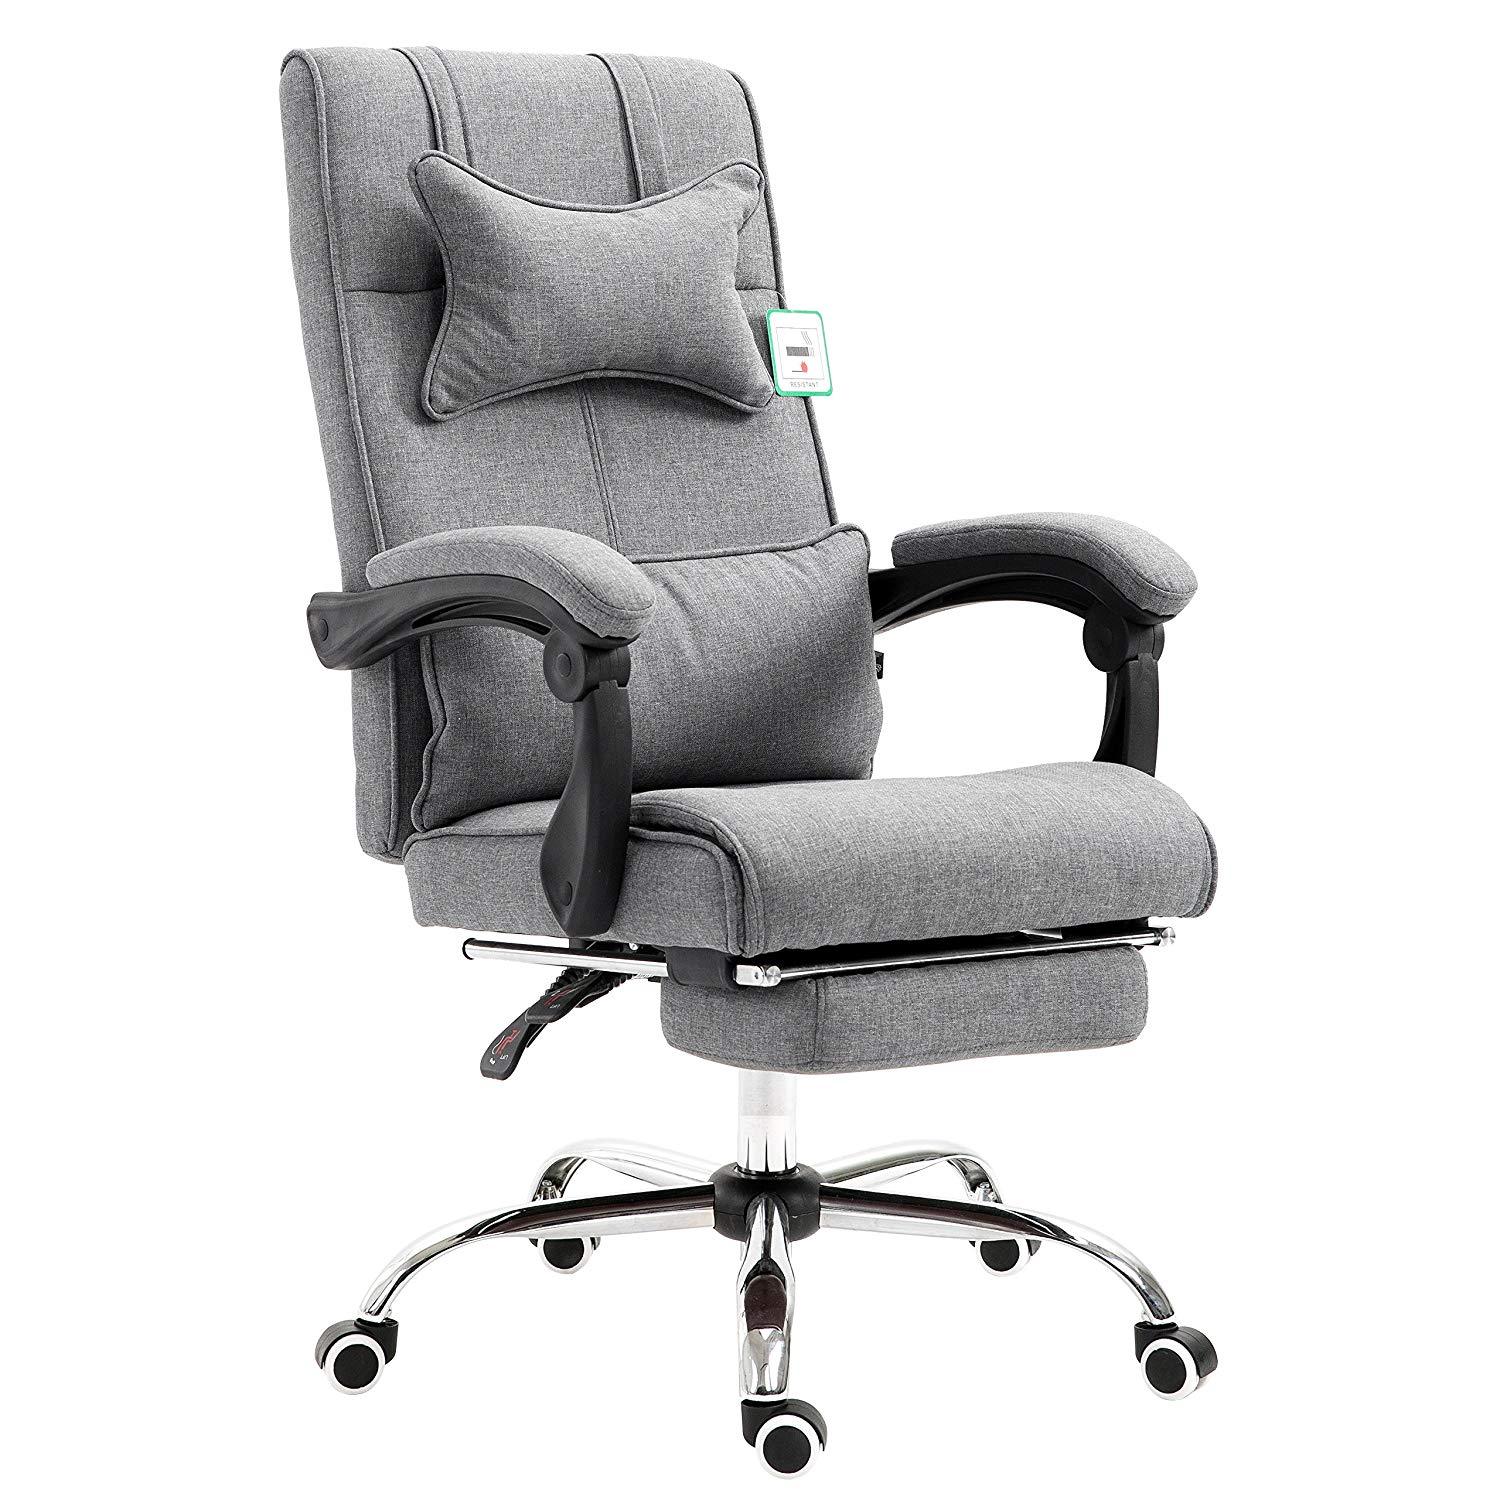 Premium Executive Reclining Desk Chair with Footrest, Headrest and Lumbar Cushion Support (Grey, Fabric)